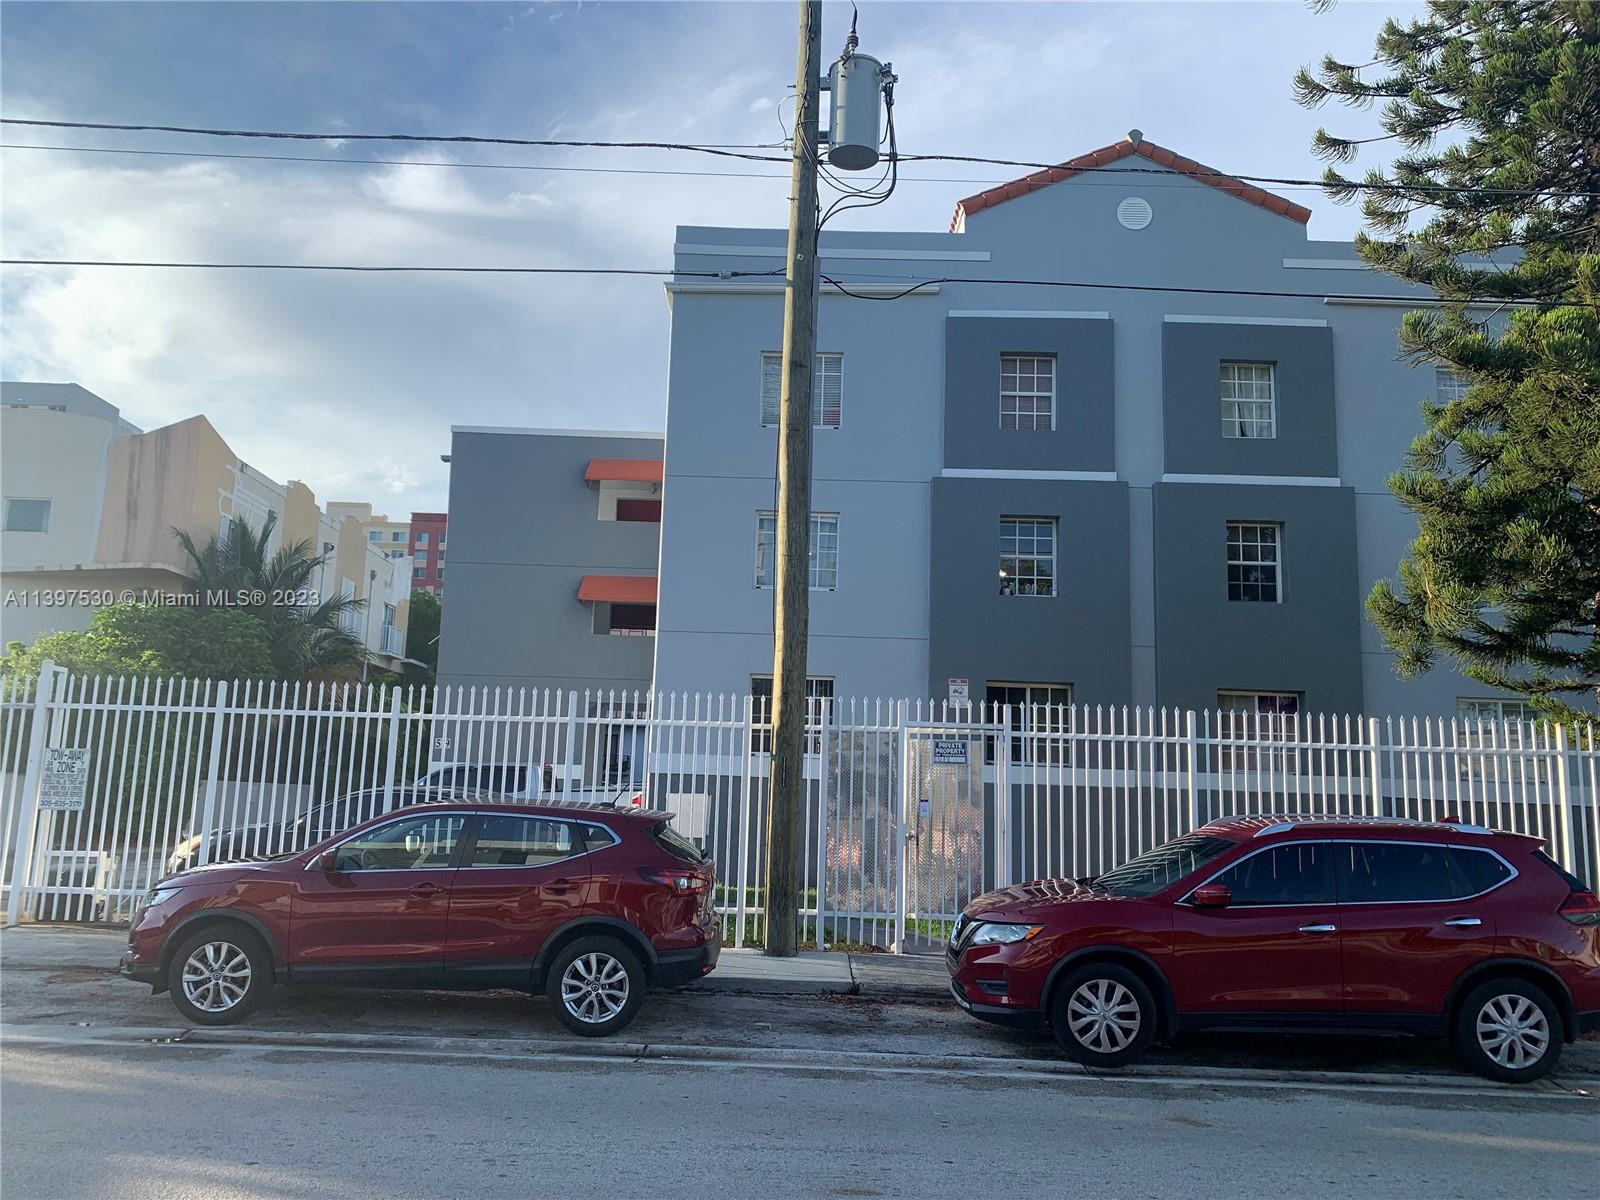 Nice 1/1 apartment in a gated community, in the heart of Little Havanna. Central AC, 1 assigned parking.
Walking distance from Downtown, Calle 8, I95.